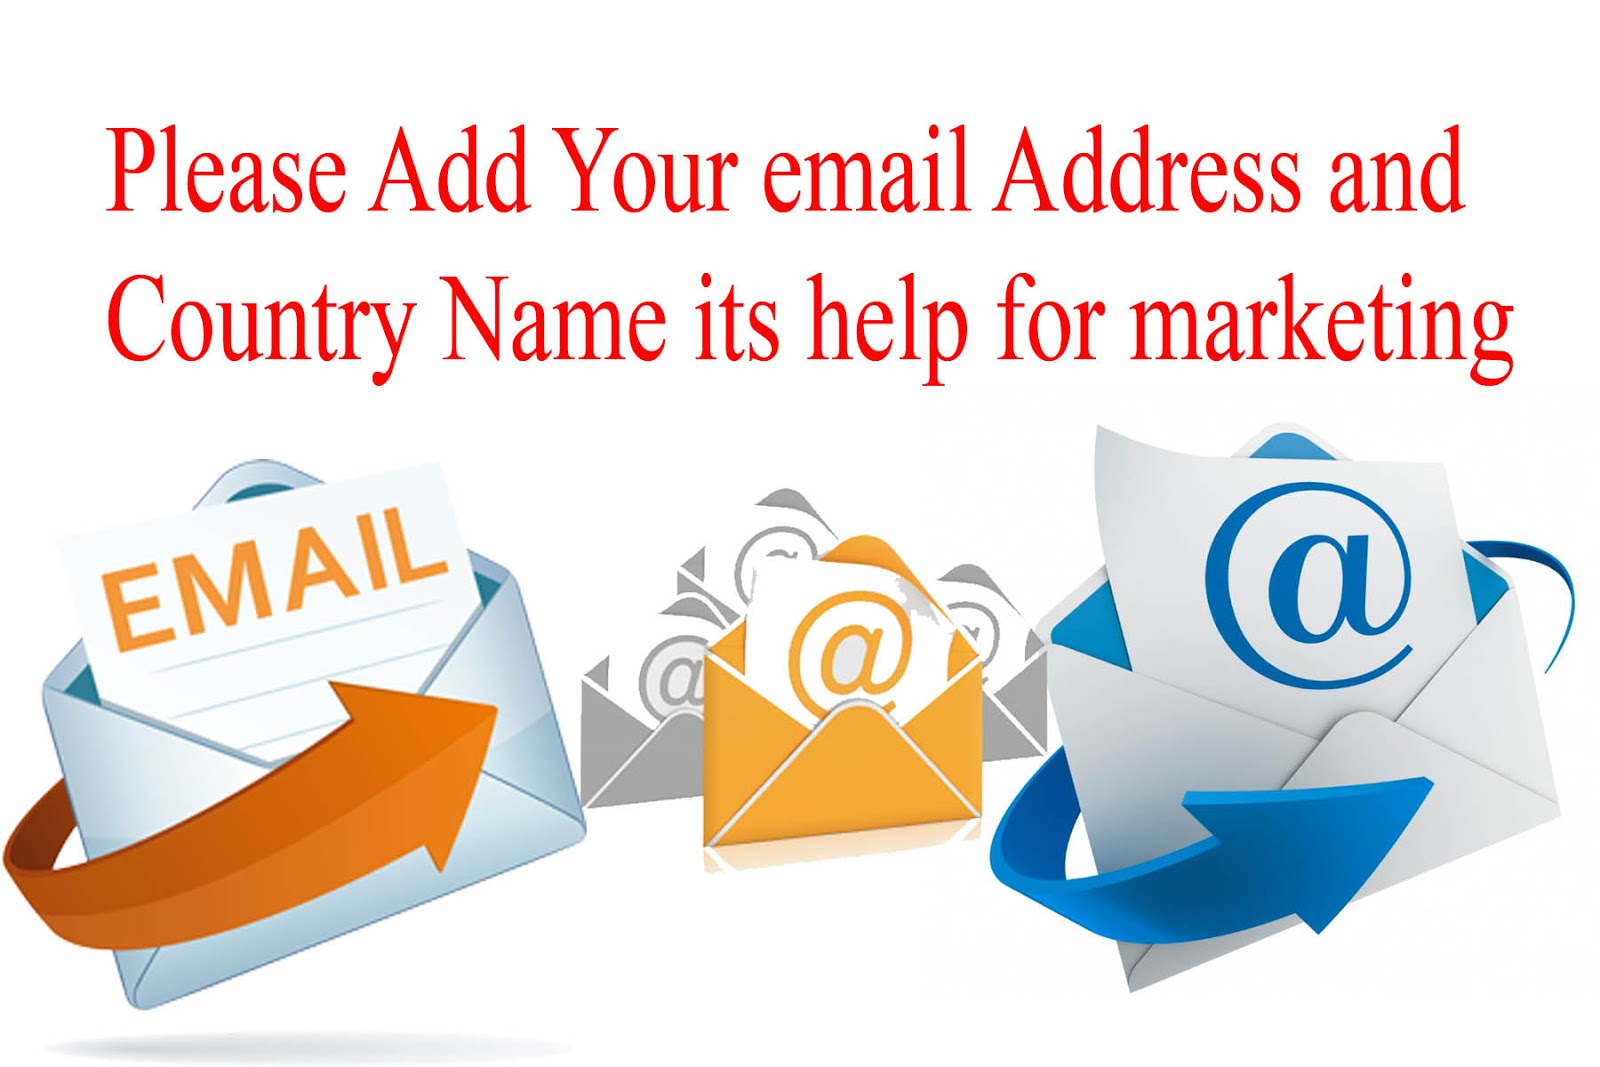 e-mail-address-for-email-marketing-free-email-address-list-14